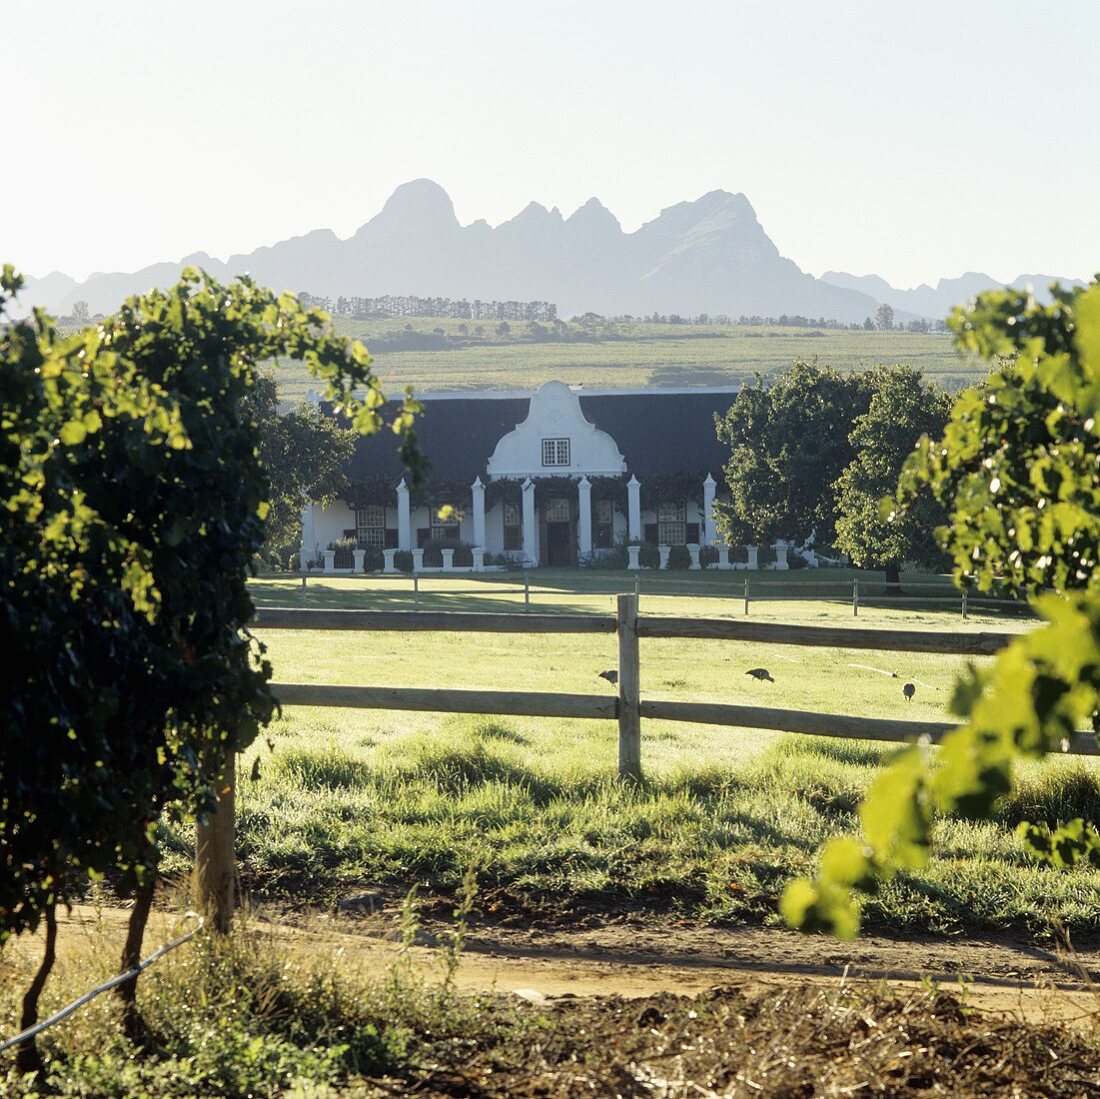 A country house in South Africa